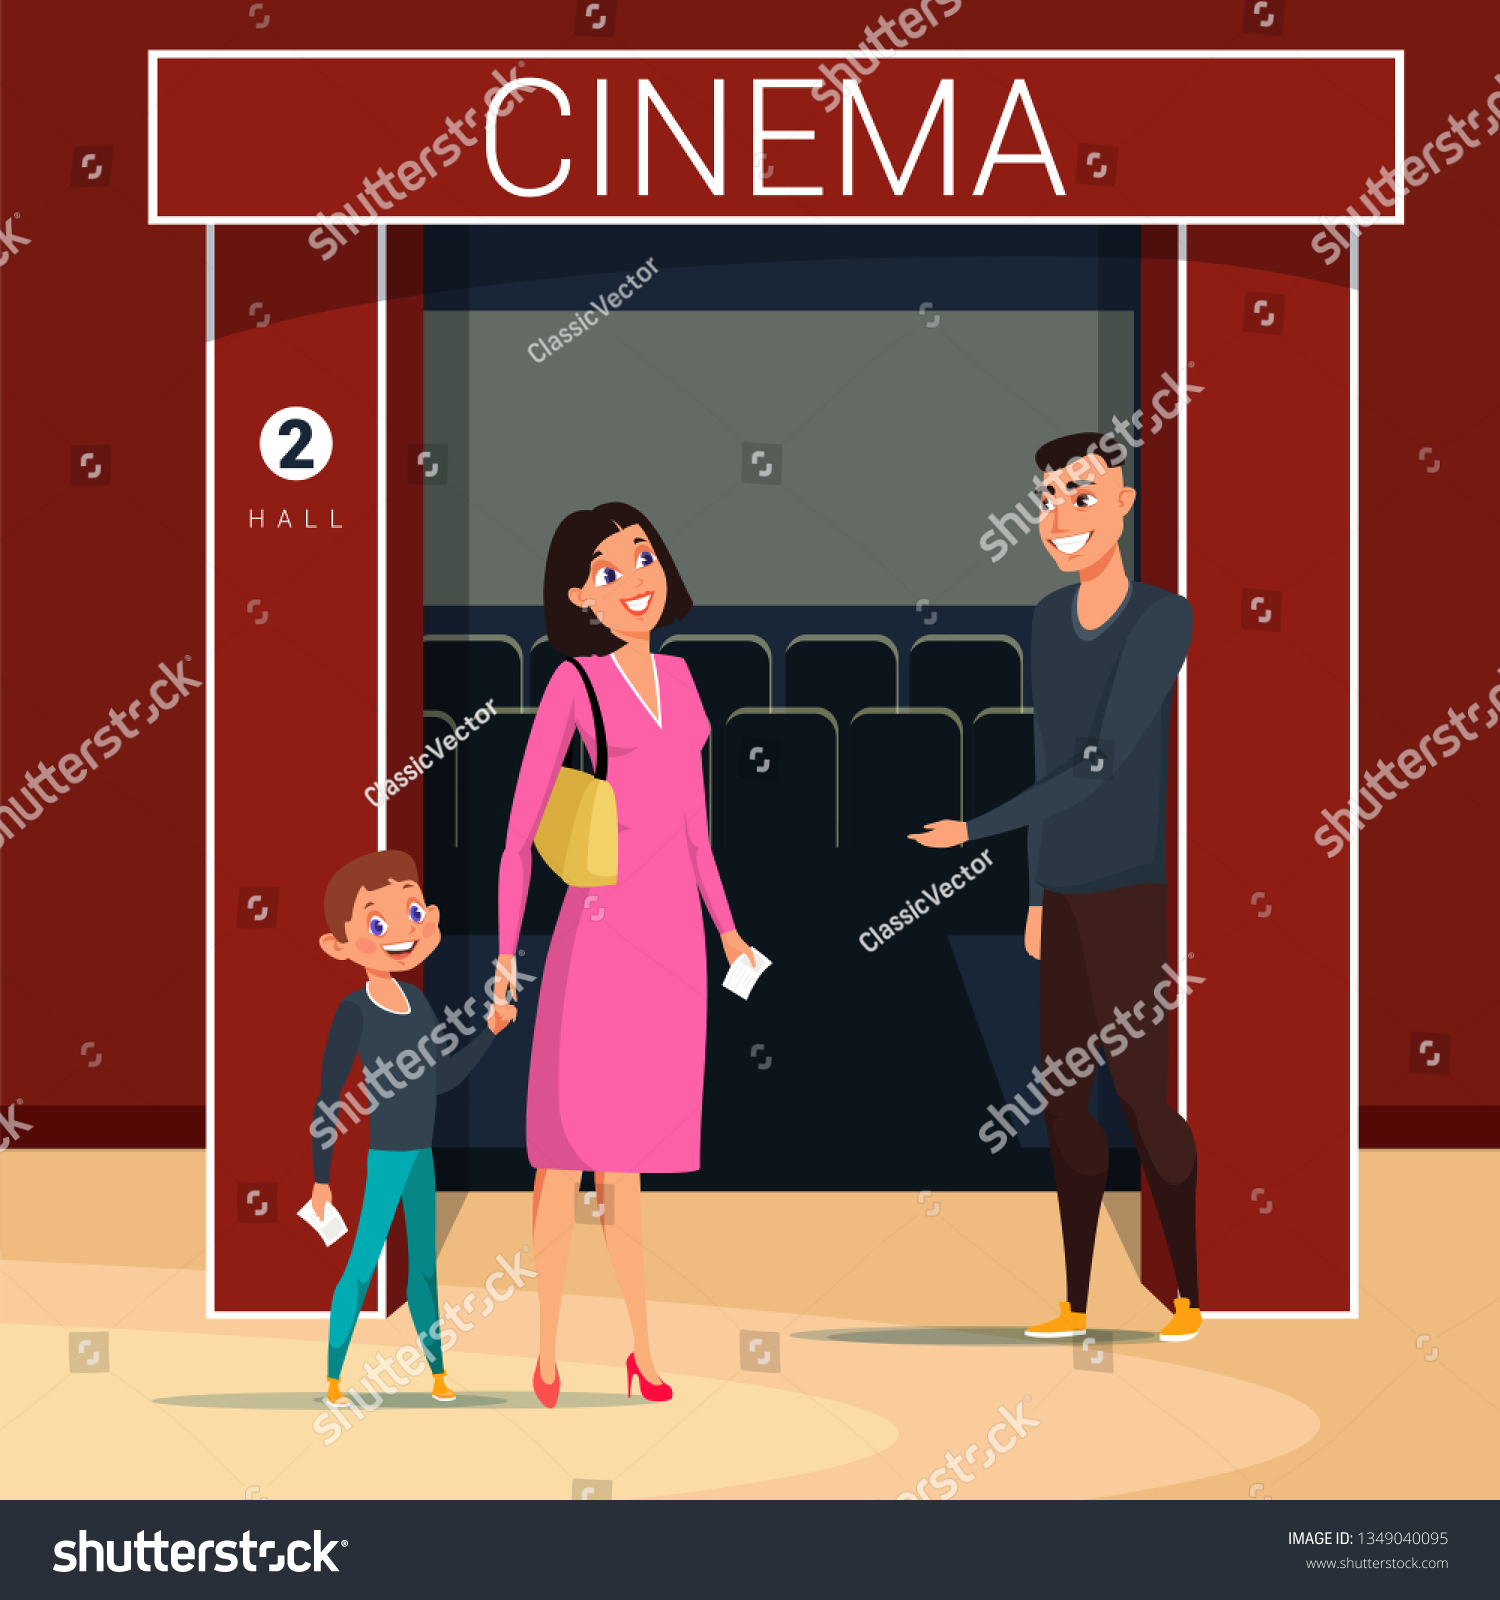 SVG of Woman with son going to cinema flat vector illustration. Worker cartoon character checking tickets. Seats, screen in empty cinema hall. Mother and son having fun after workday. Family watching film svg